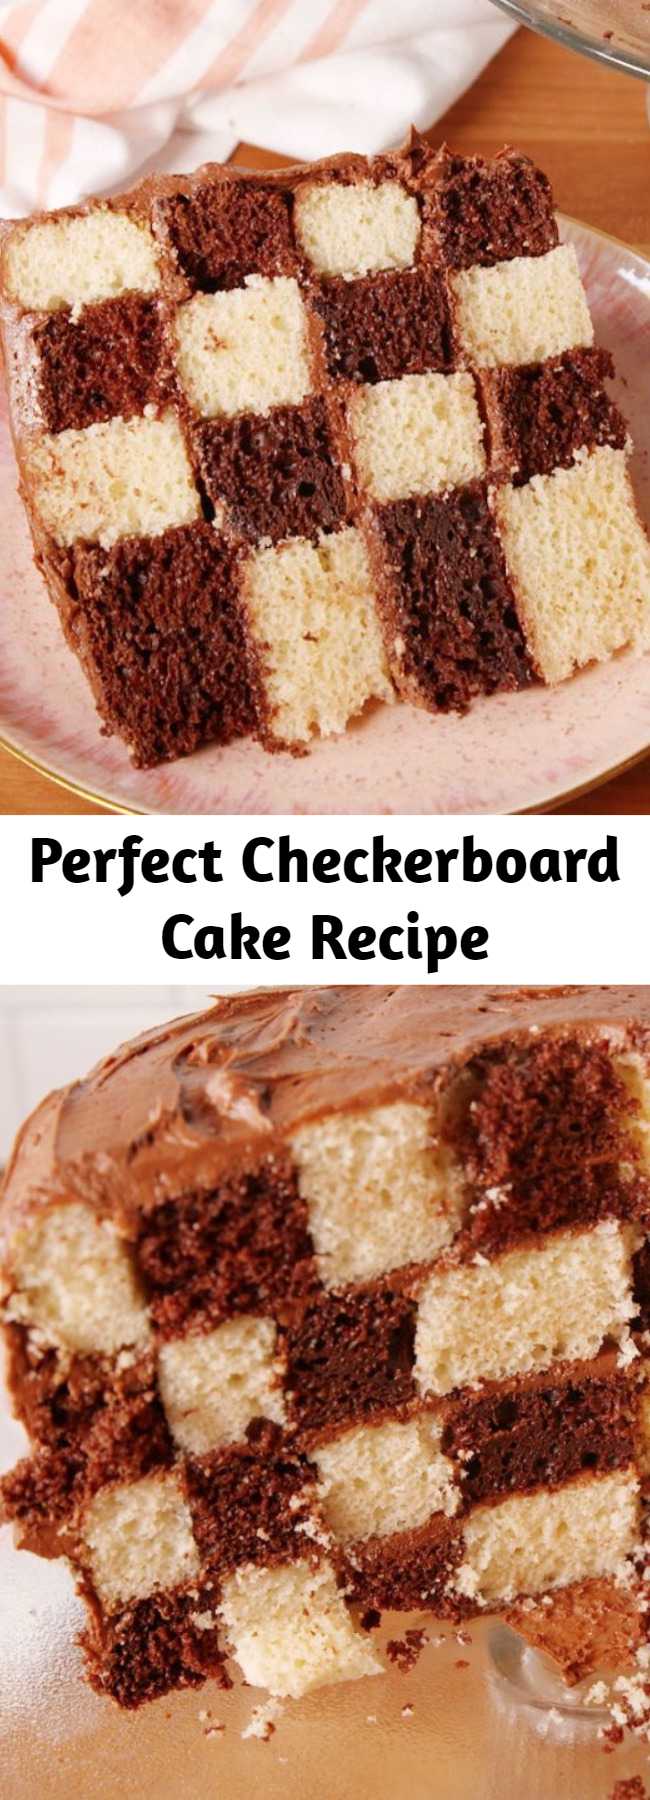 Perfect Checkerboard Cake Recipe - Mother's Day calls for something special, and this checkerboard cake always impresses.